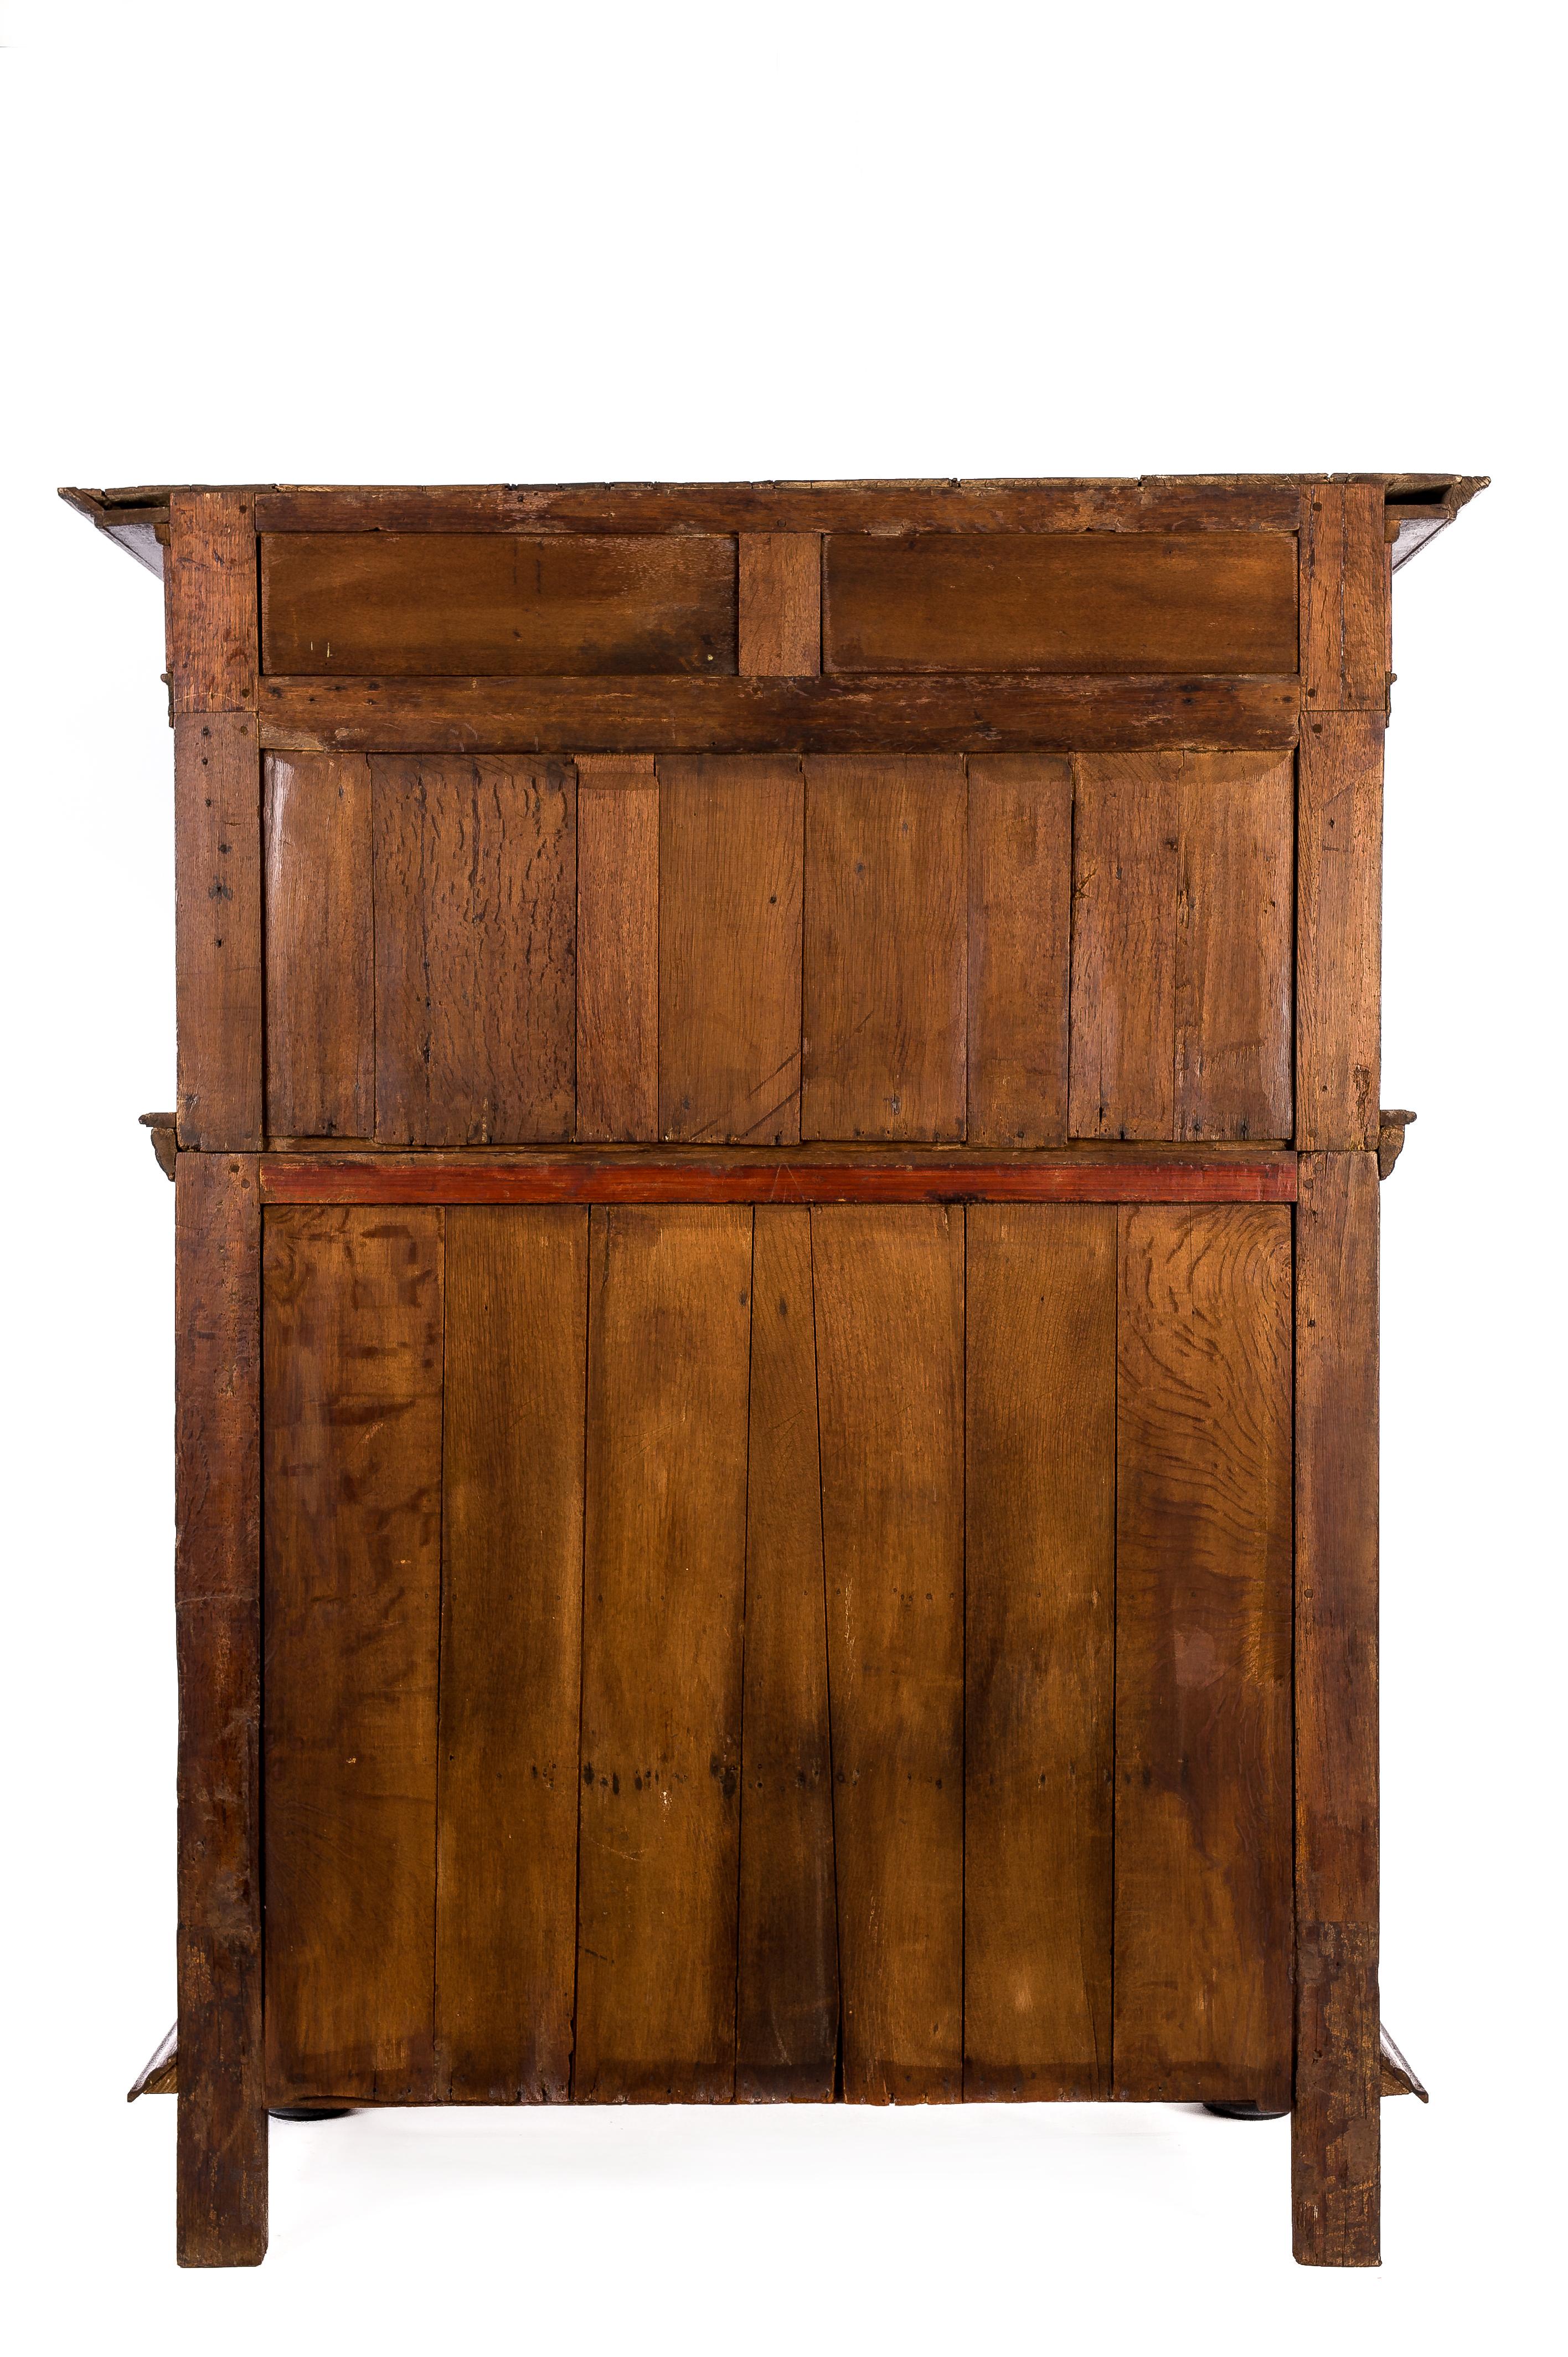 17th Century Dutch Renaissance Oak and Ebony Inlay Four-Door Cabinet Dated 1660 For Sale 13